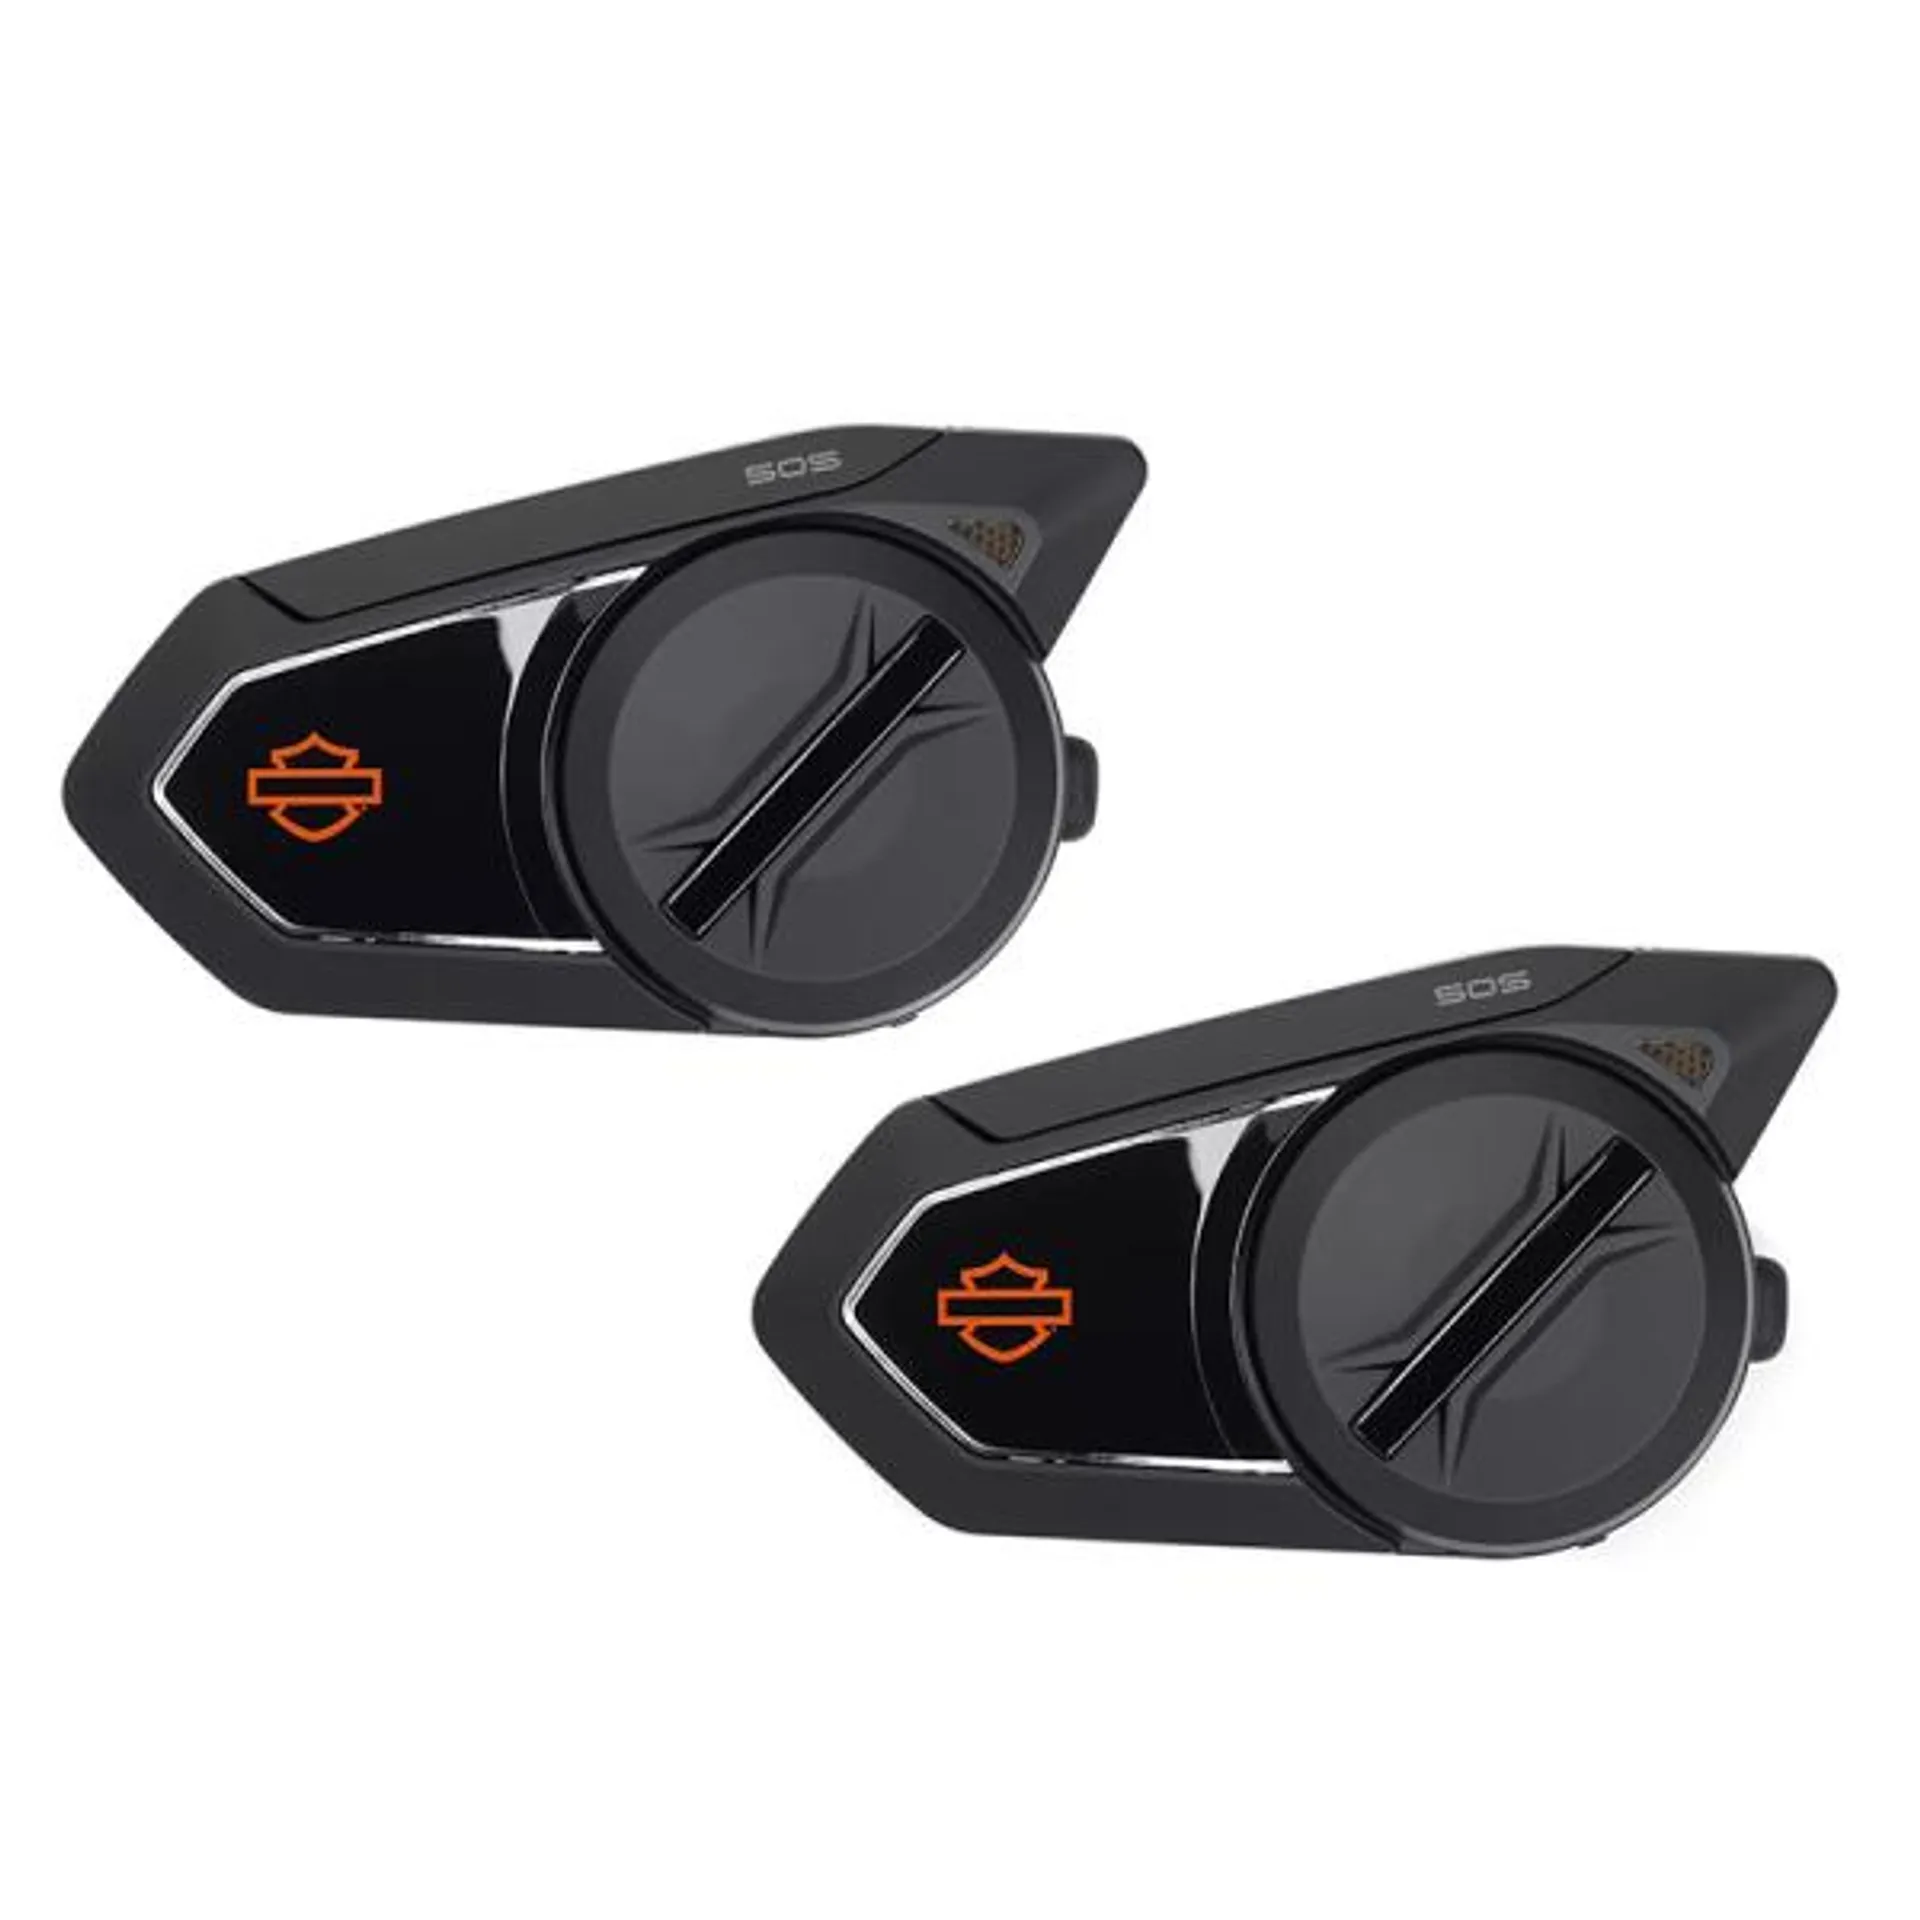 H-D Audio 50S Bluetooth Headset Dual Pack